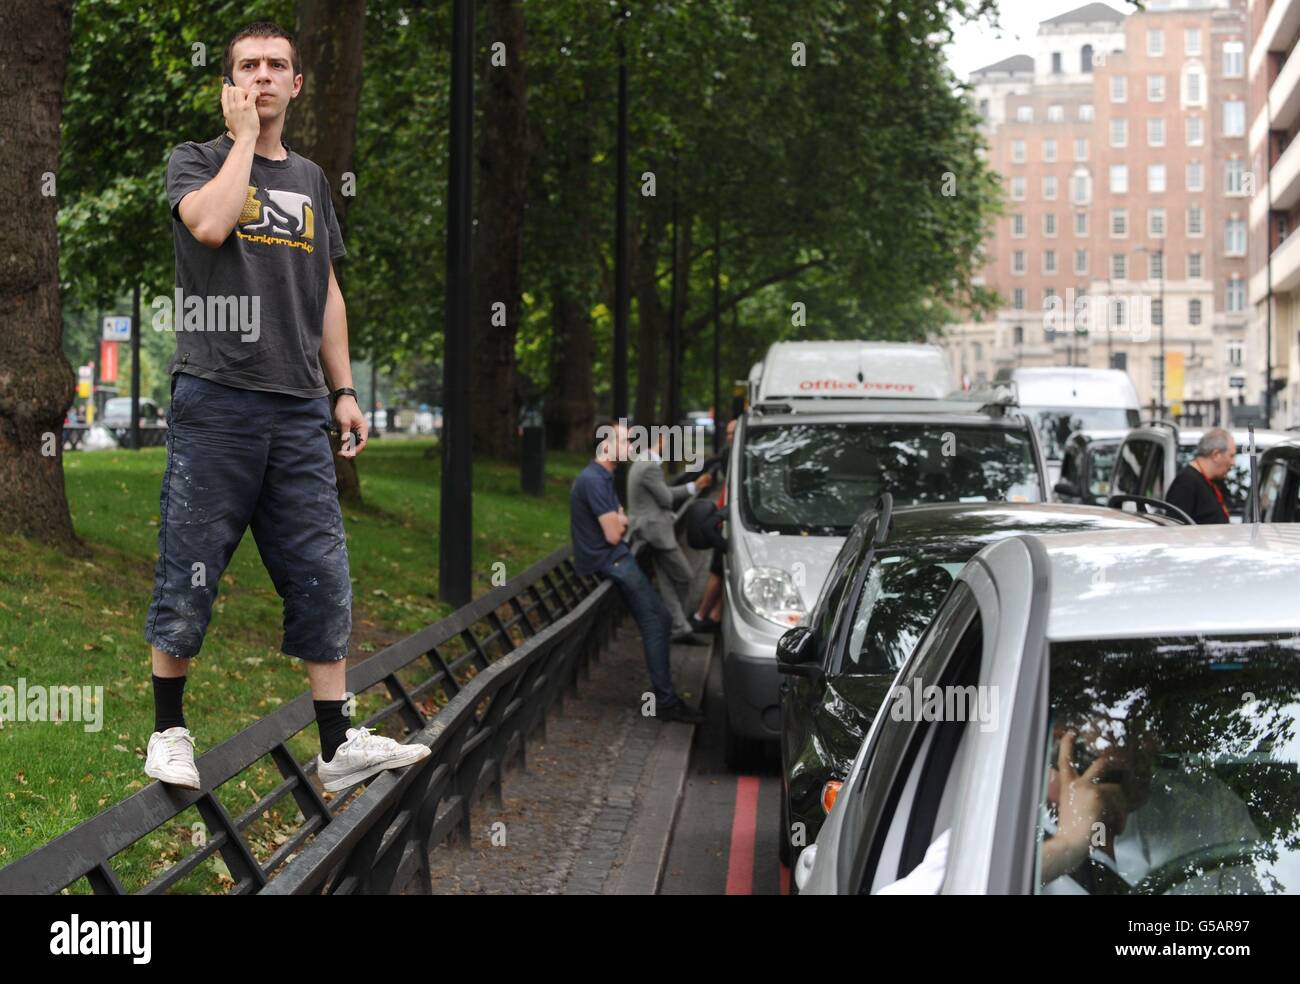 A driver climbs on a roadside barrier beside stationary cars in a traffic jam on Park Lane in central London, as London taxi drivers protested over a ban on using Olympic traffic lanes. Stock Photo